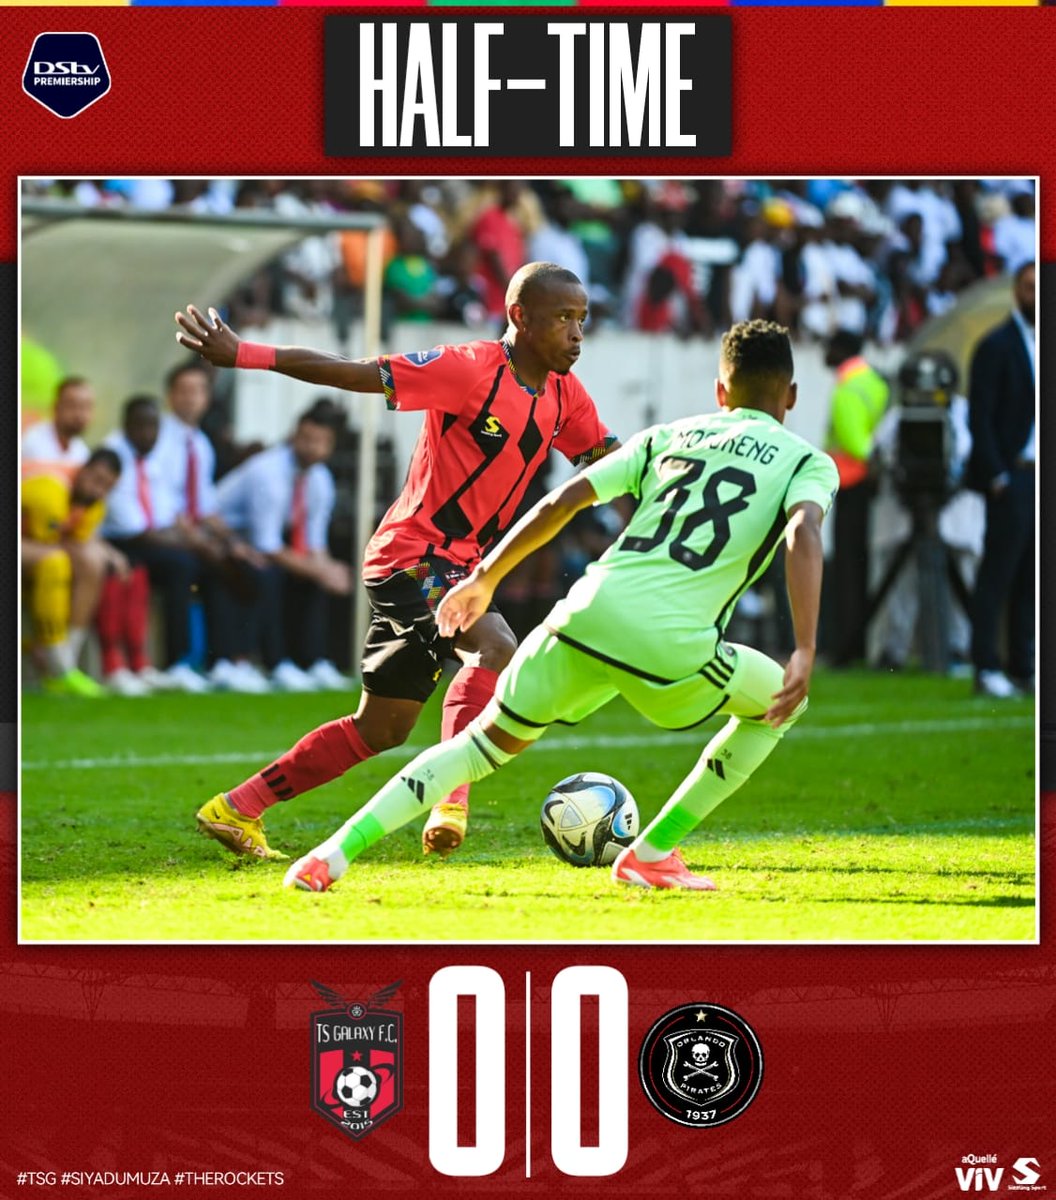 Halftime has arrived with the score held at a draw.🚀 @aQuelle @aQuelleviv #Siyadumuza #TheRockets #TSG